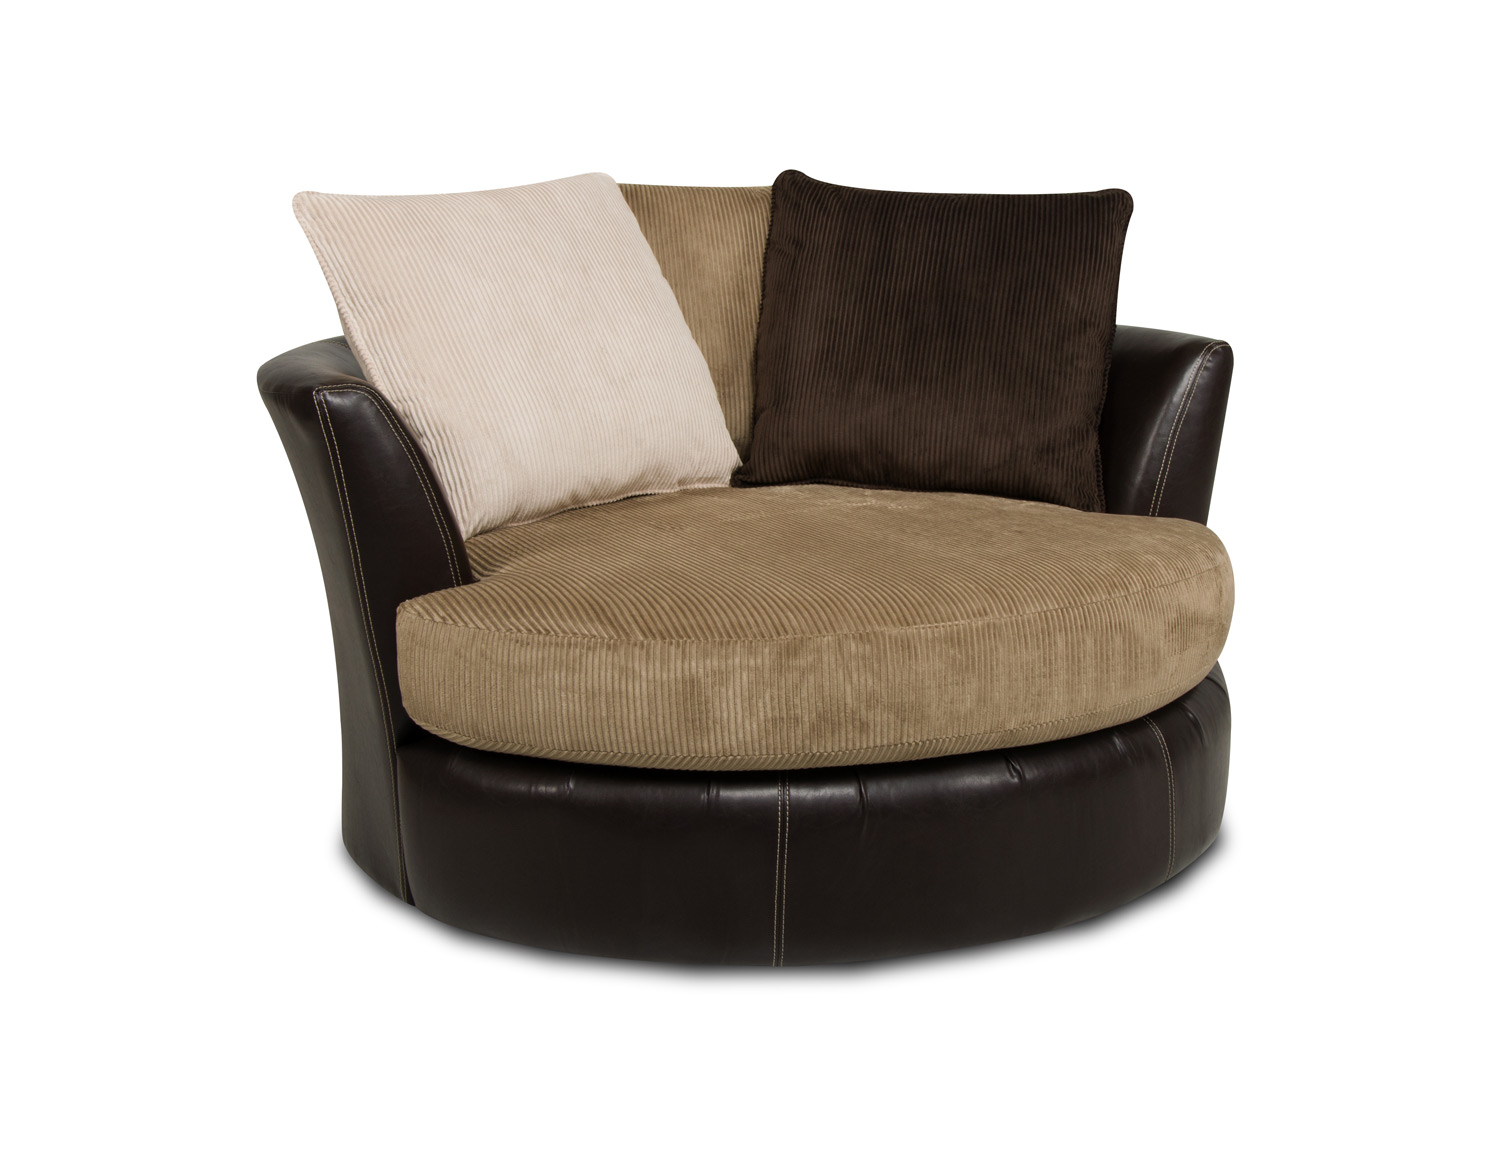 Global Furniture USA 3480 Massive Swivel Chair with 3 Pillows - Cord/Bicast - Beige/Chocolate